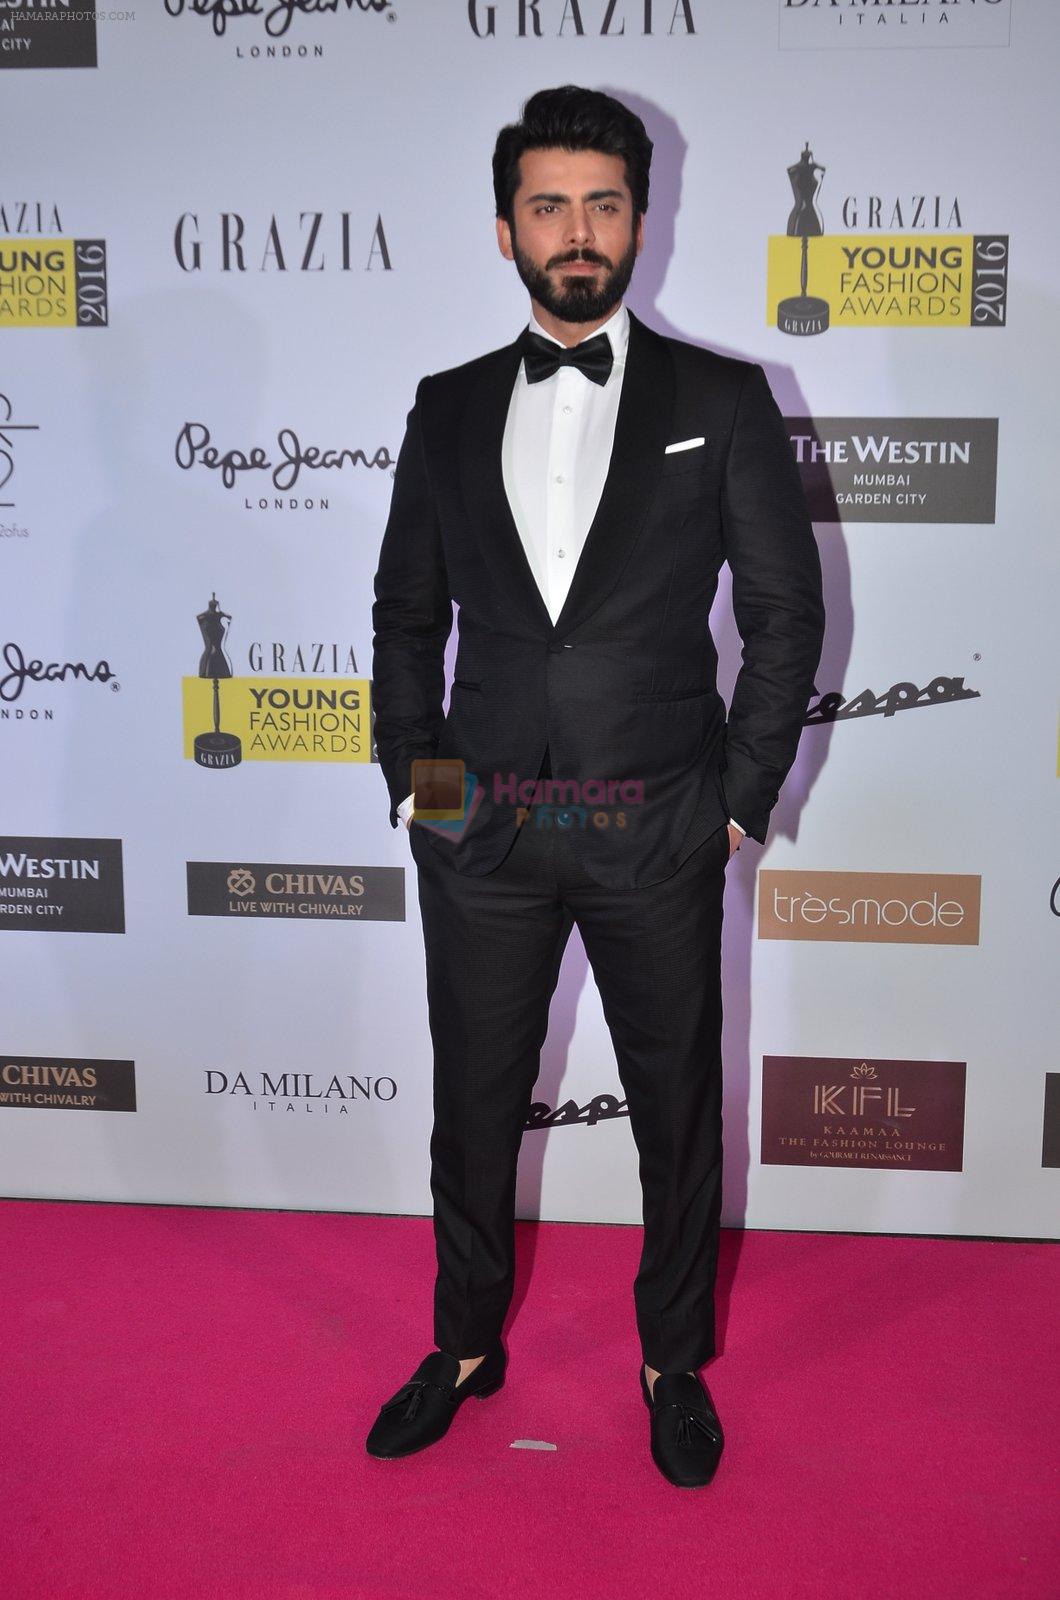 Fawad Khan at Grazia Young Fashion Awards 2016 Red Carpet on 7th April 2016